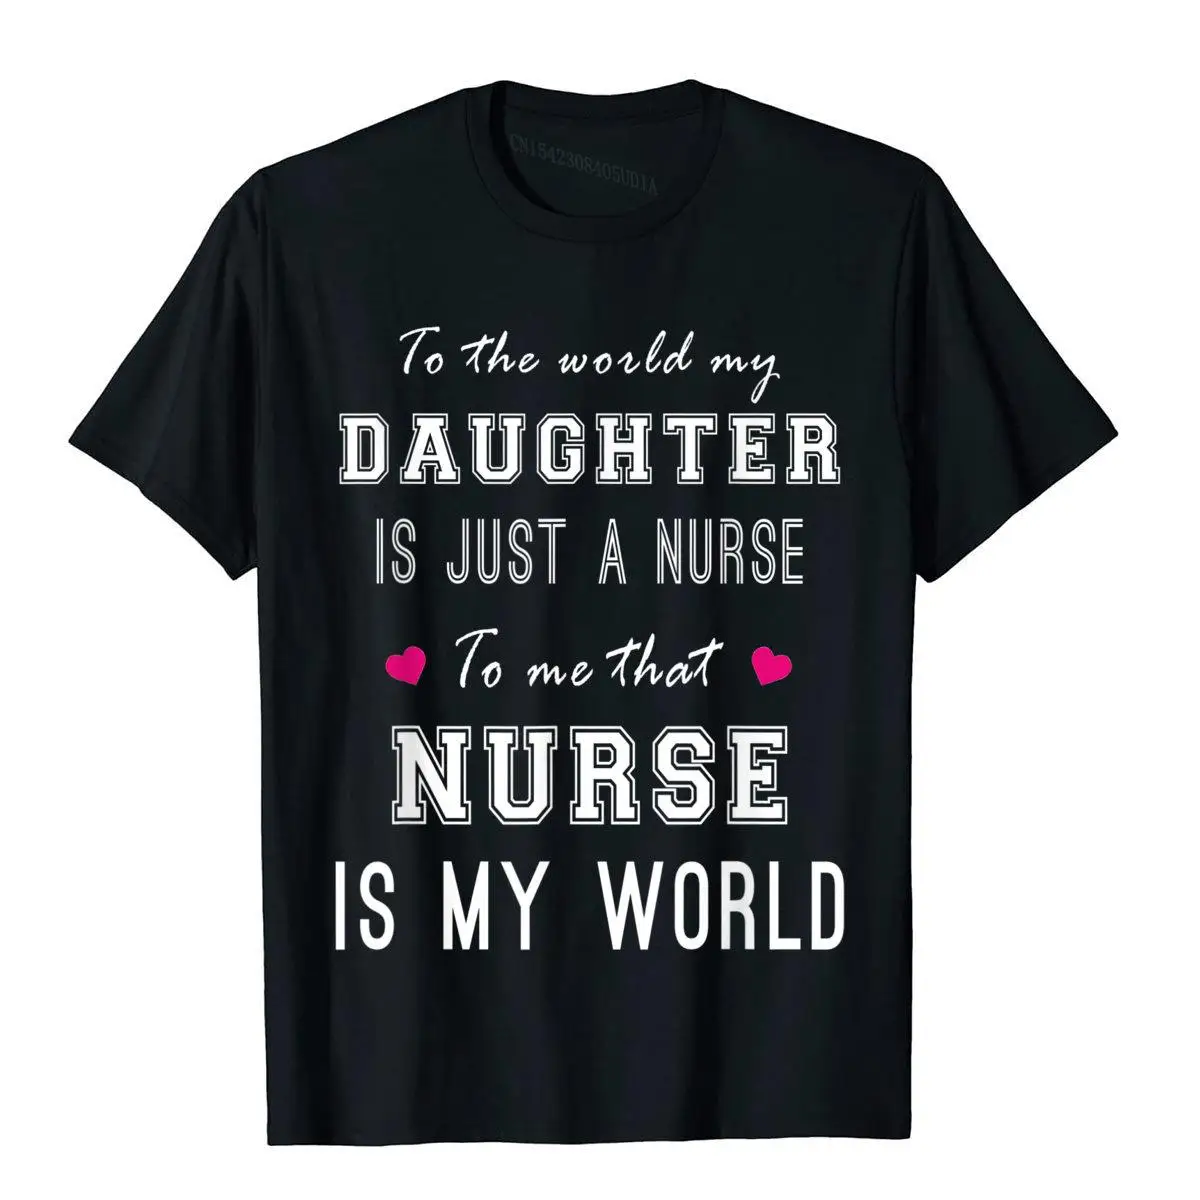 

That Nurse Is My World Gift For Nurse's Parents T-Shirt Oversized Unique Top T-Shirts Cotton Tops Shirts For Men Printing